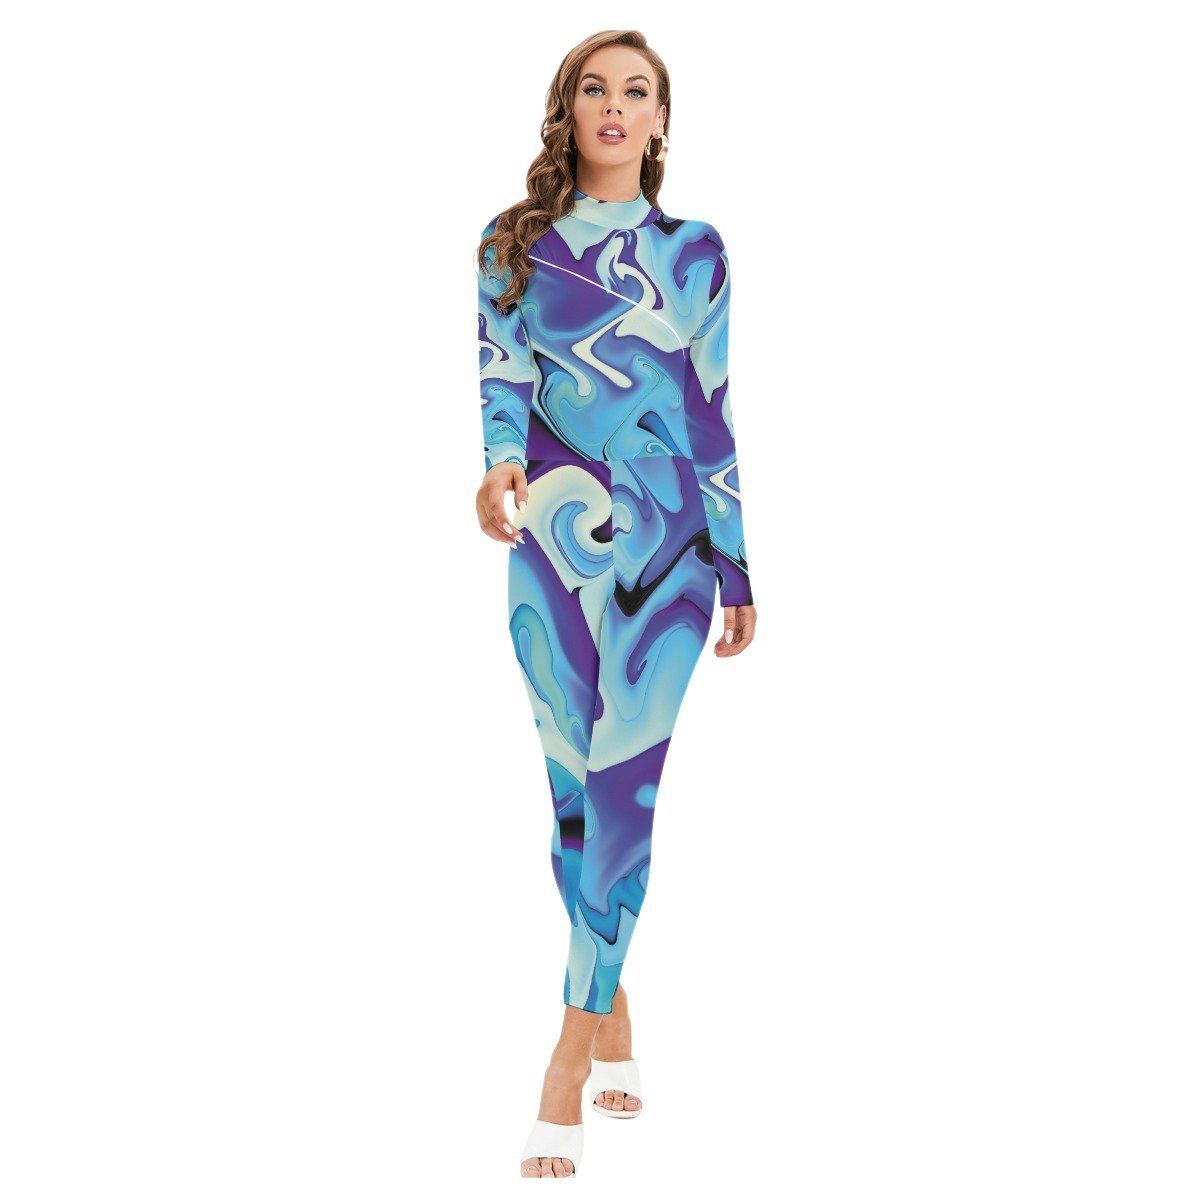 Abstract Blue Psychedelic Print Women's Long-sleeved High-neck Jumpsuit Playsuit Zipper - kayzers